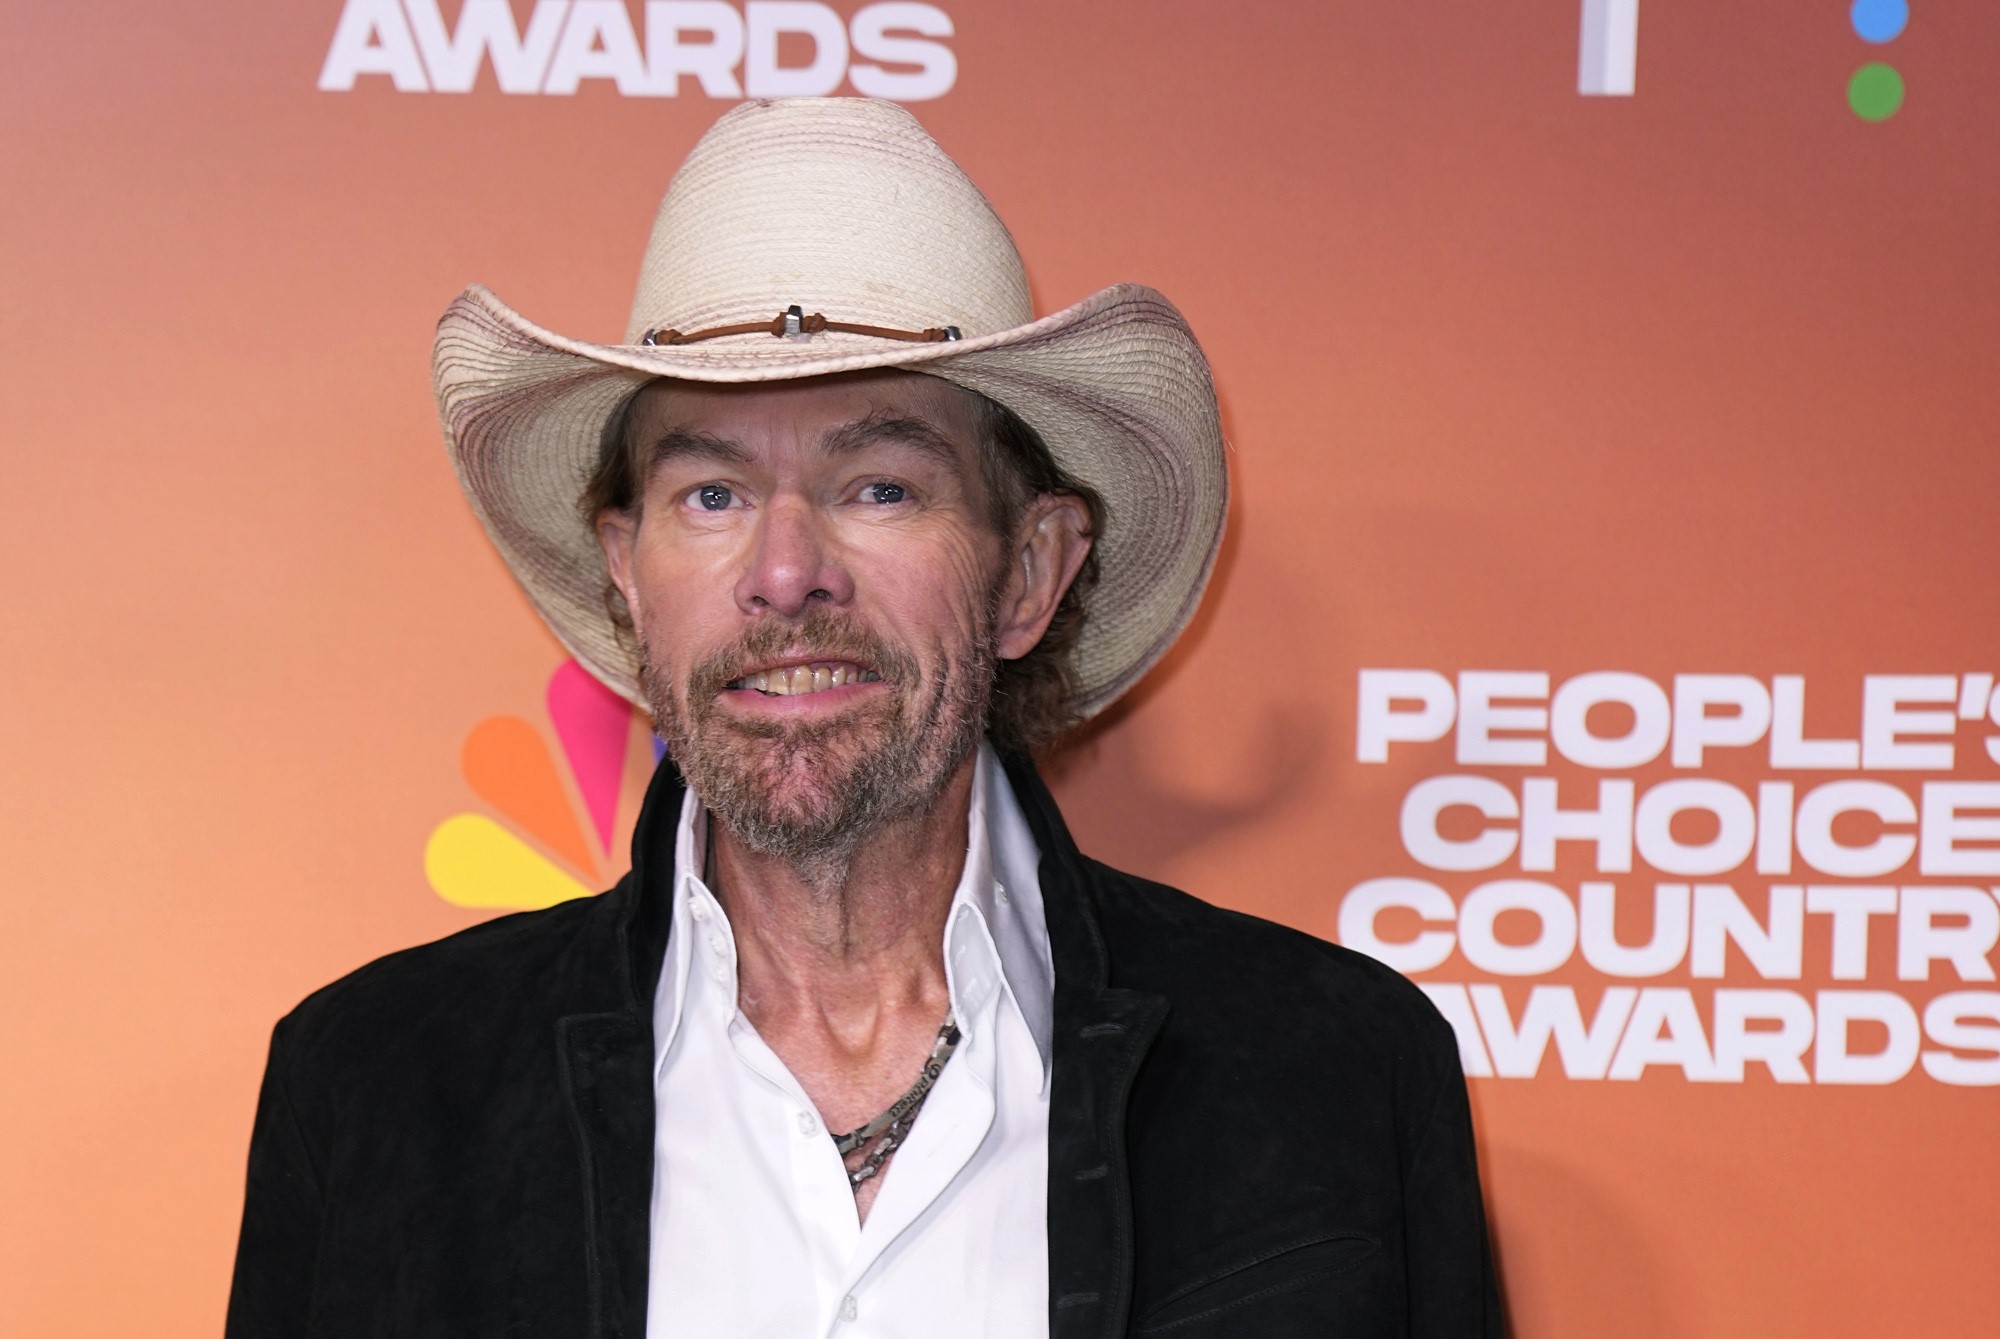 Country singer-songwriter Toby Keith has died after battling stomach cancer